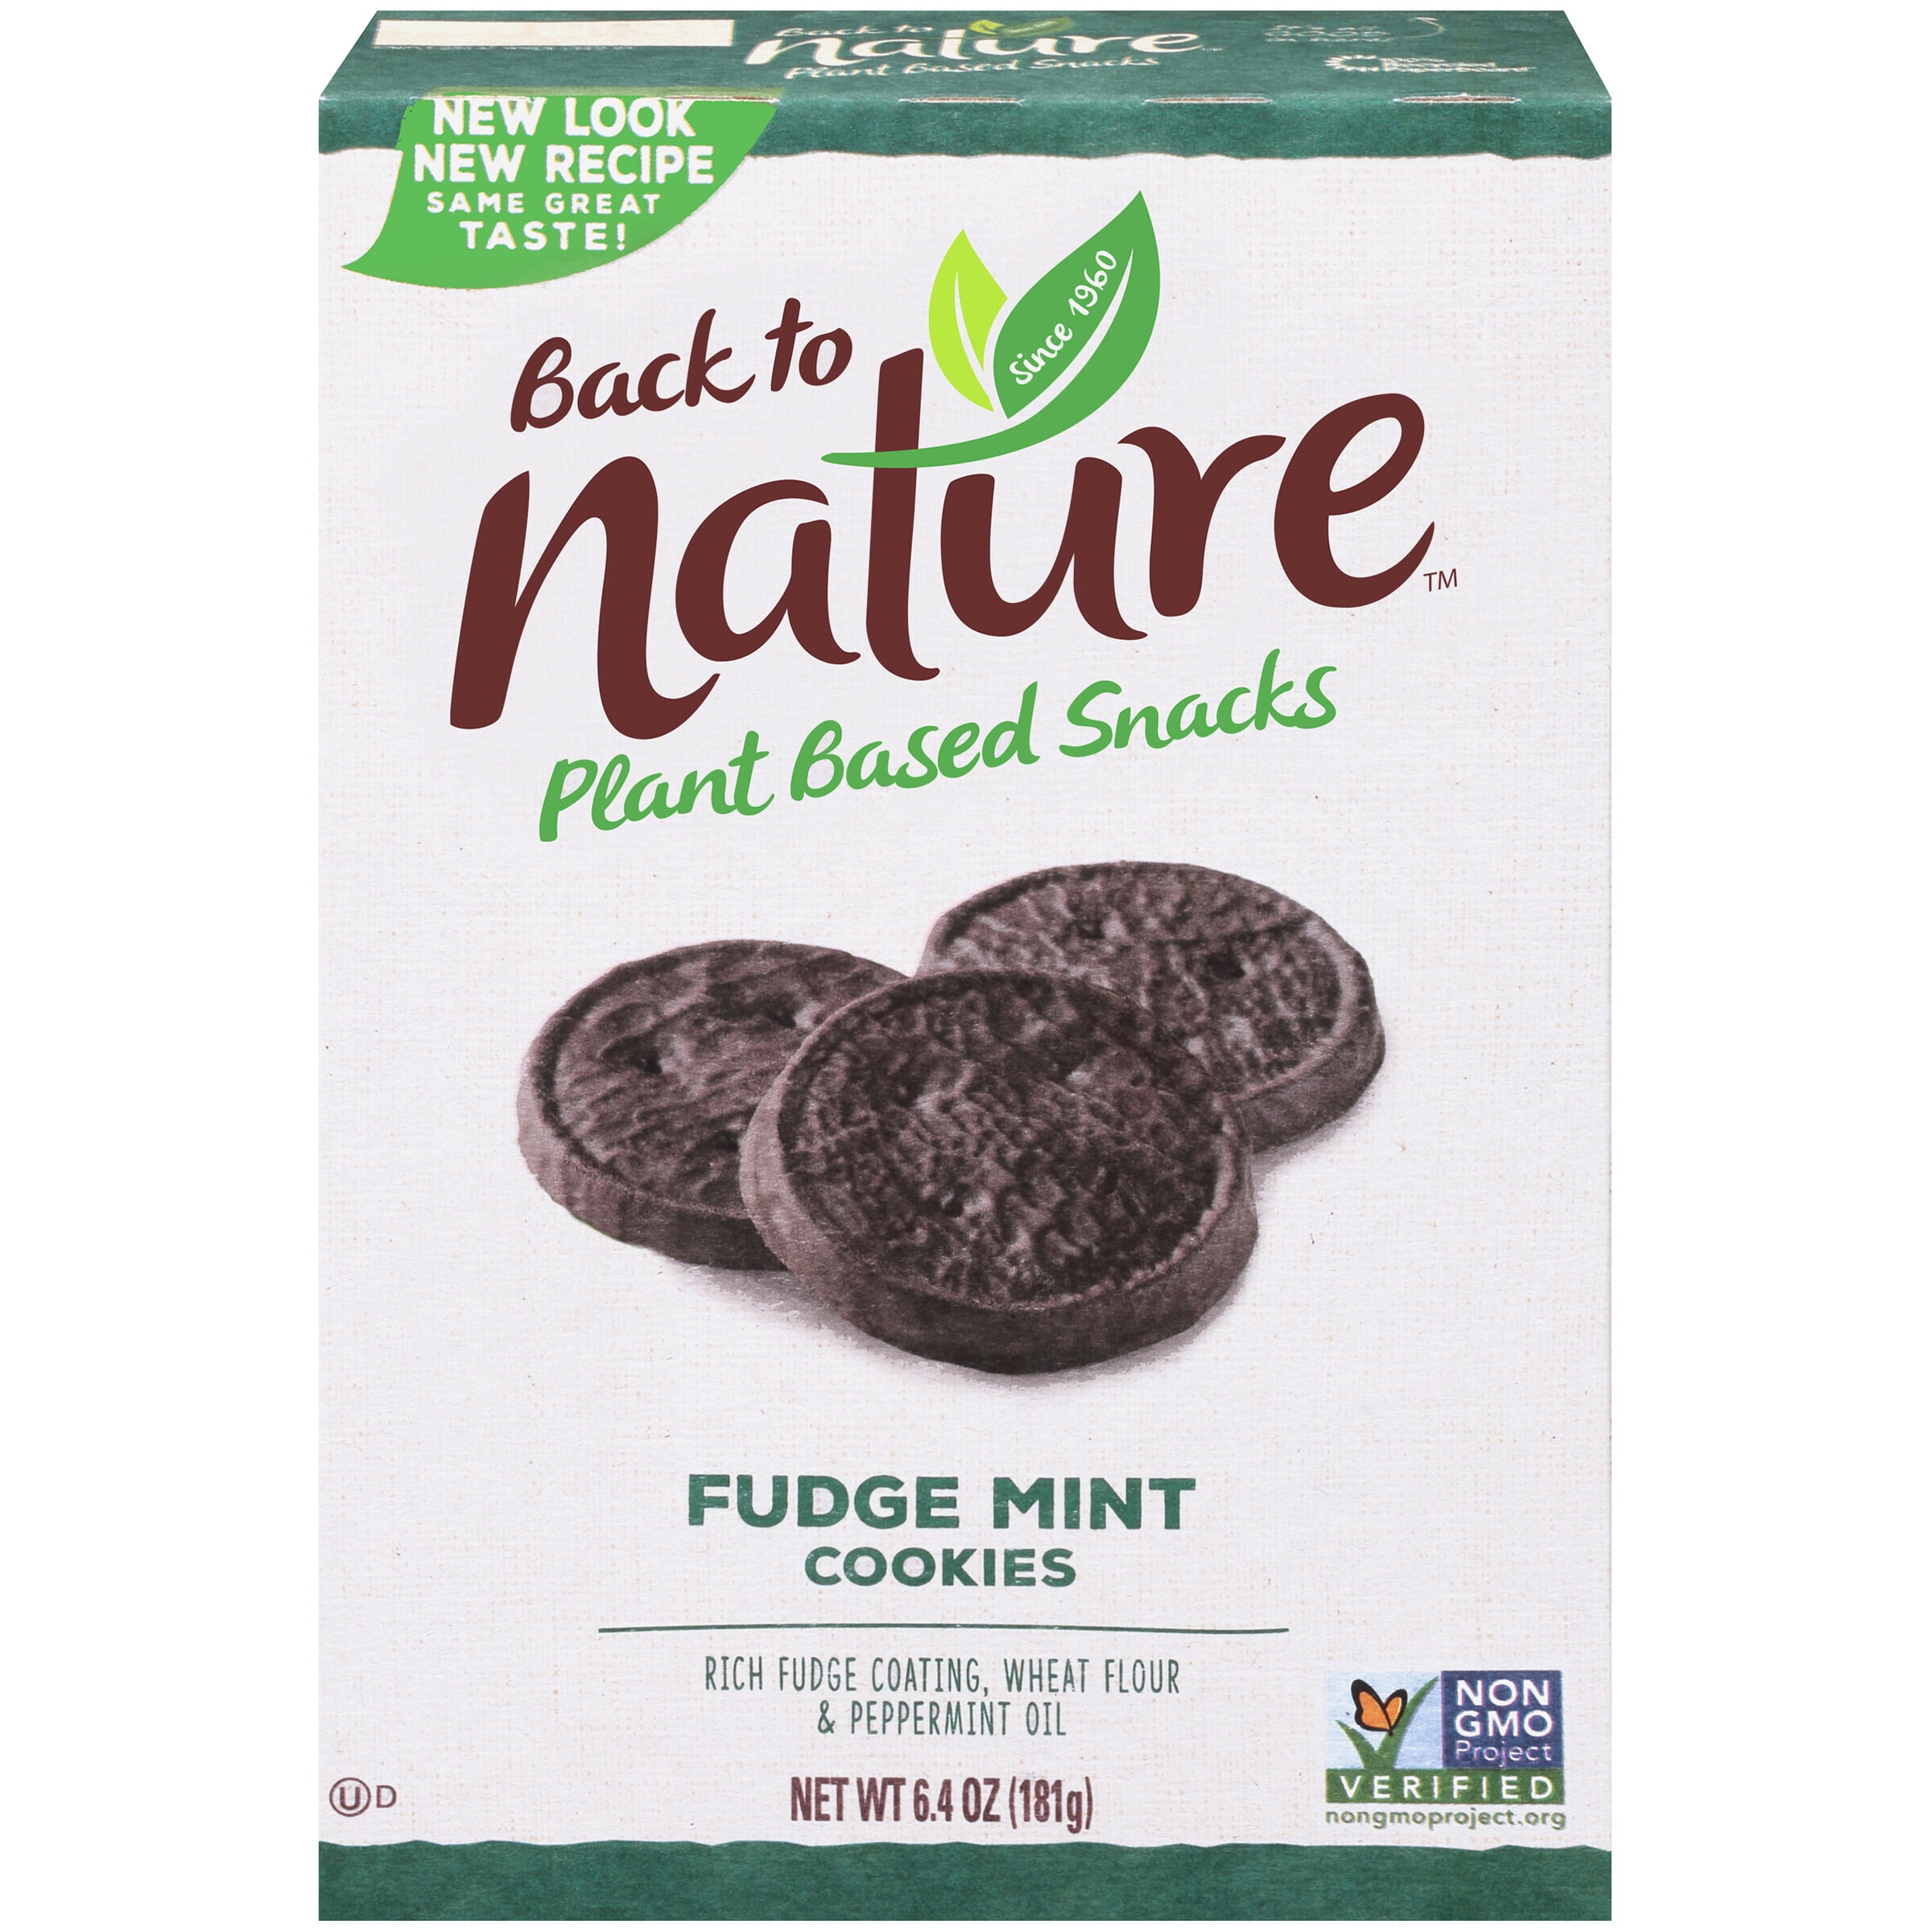 Photo 1 of 4 pack of Back to Nature Plant Based Snacks Fudge Mint Cookies 6.4 oz. Box